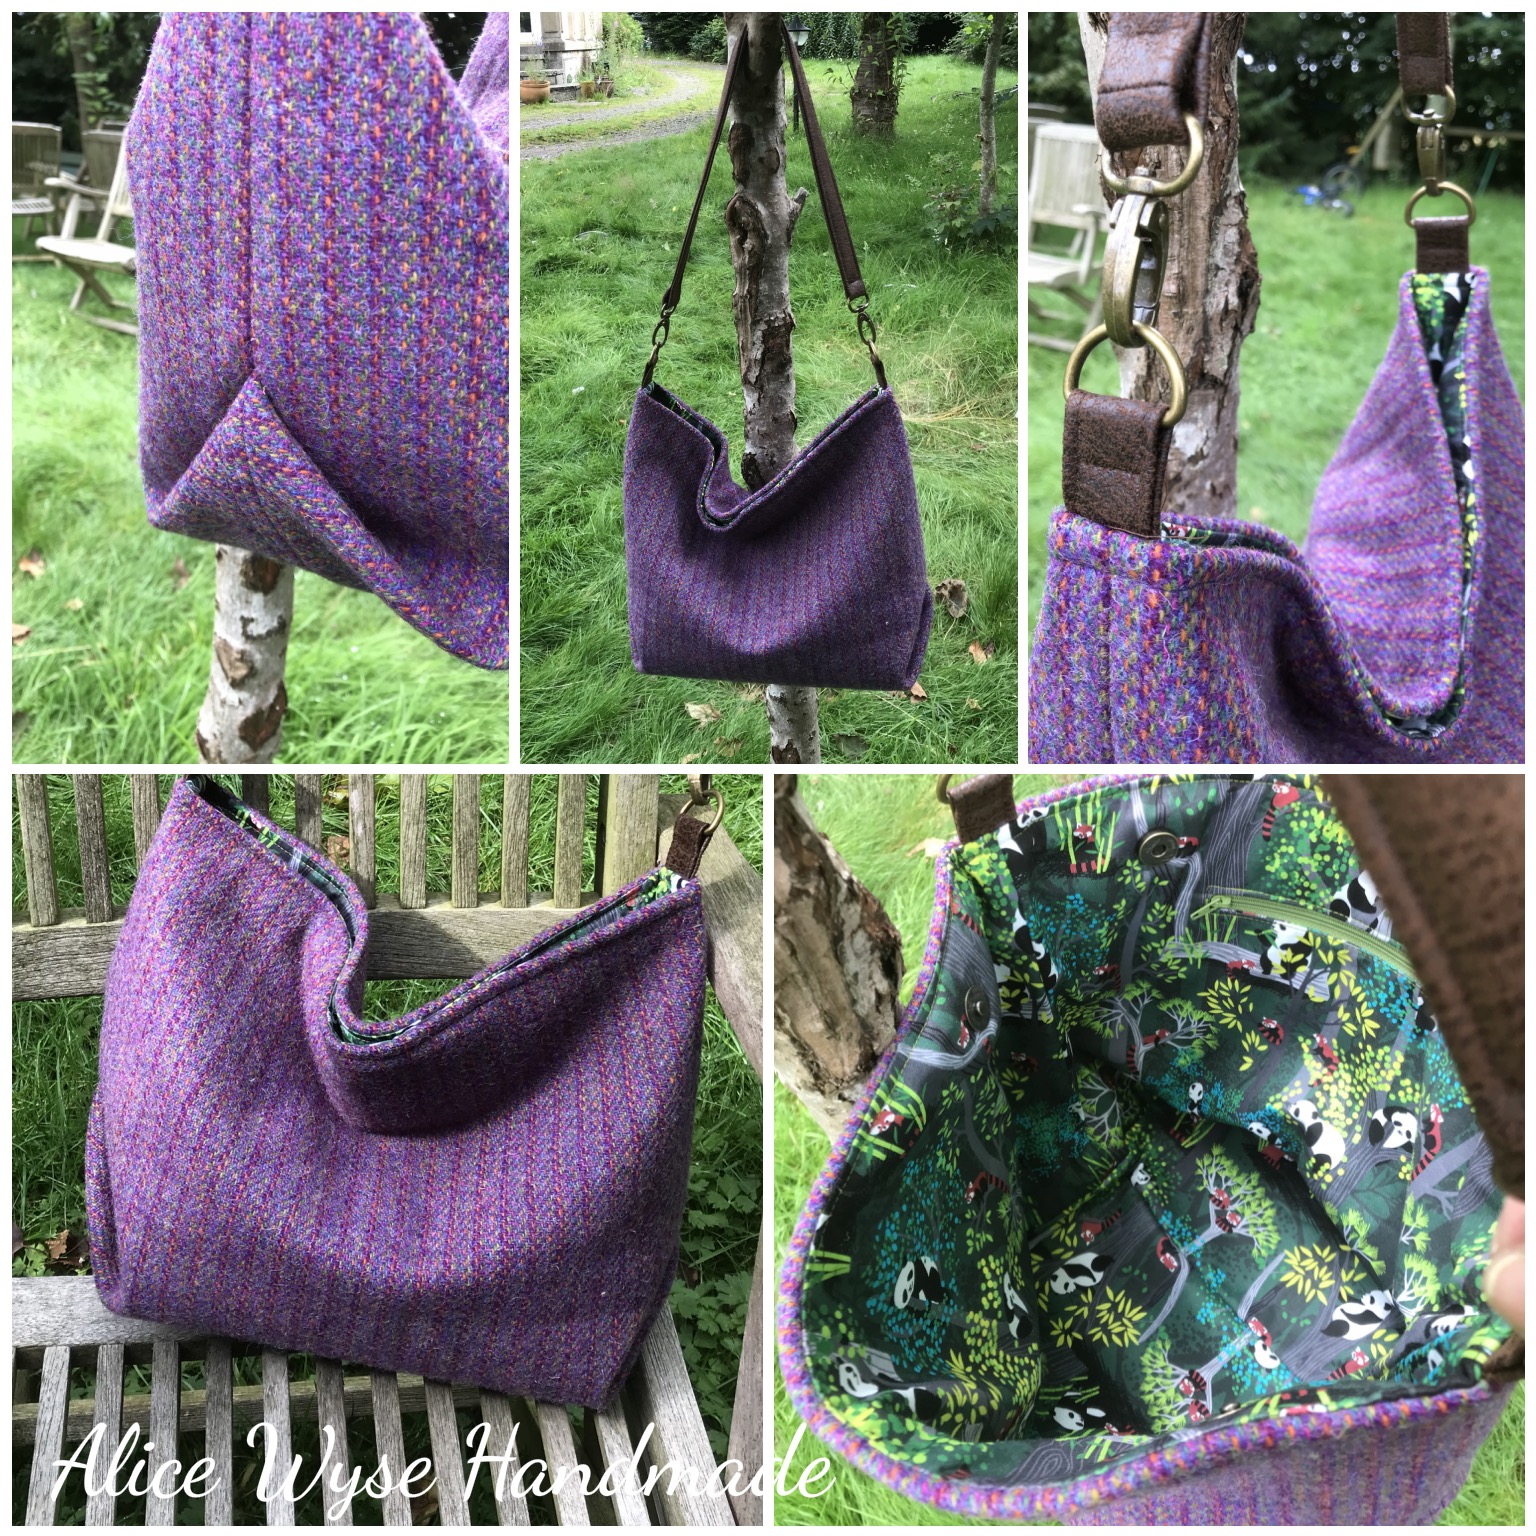 The Cwtsh Bag from Sewing Patterns by Junyuan 
, made by Alice Ferguson